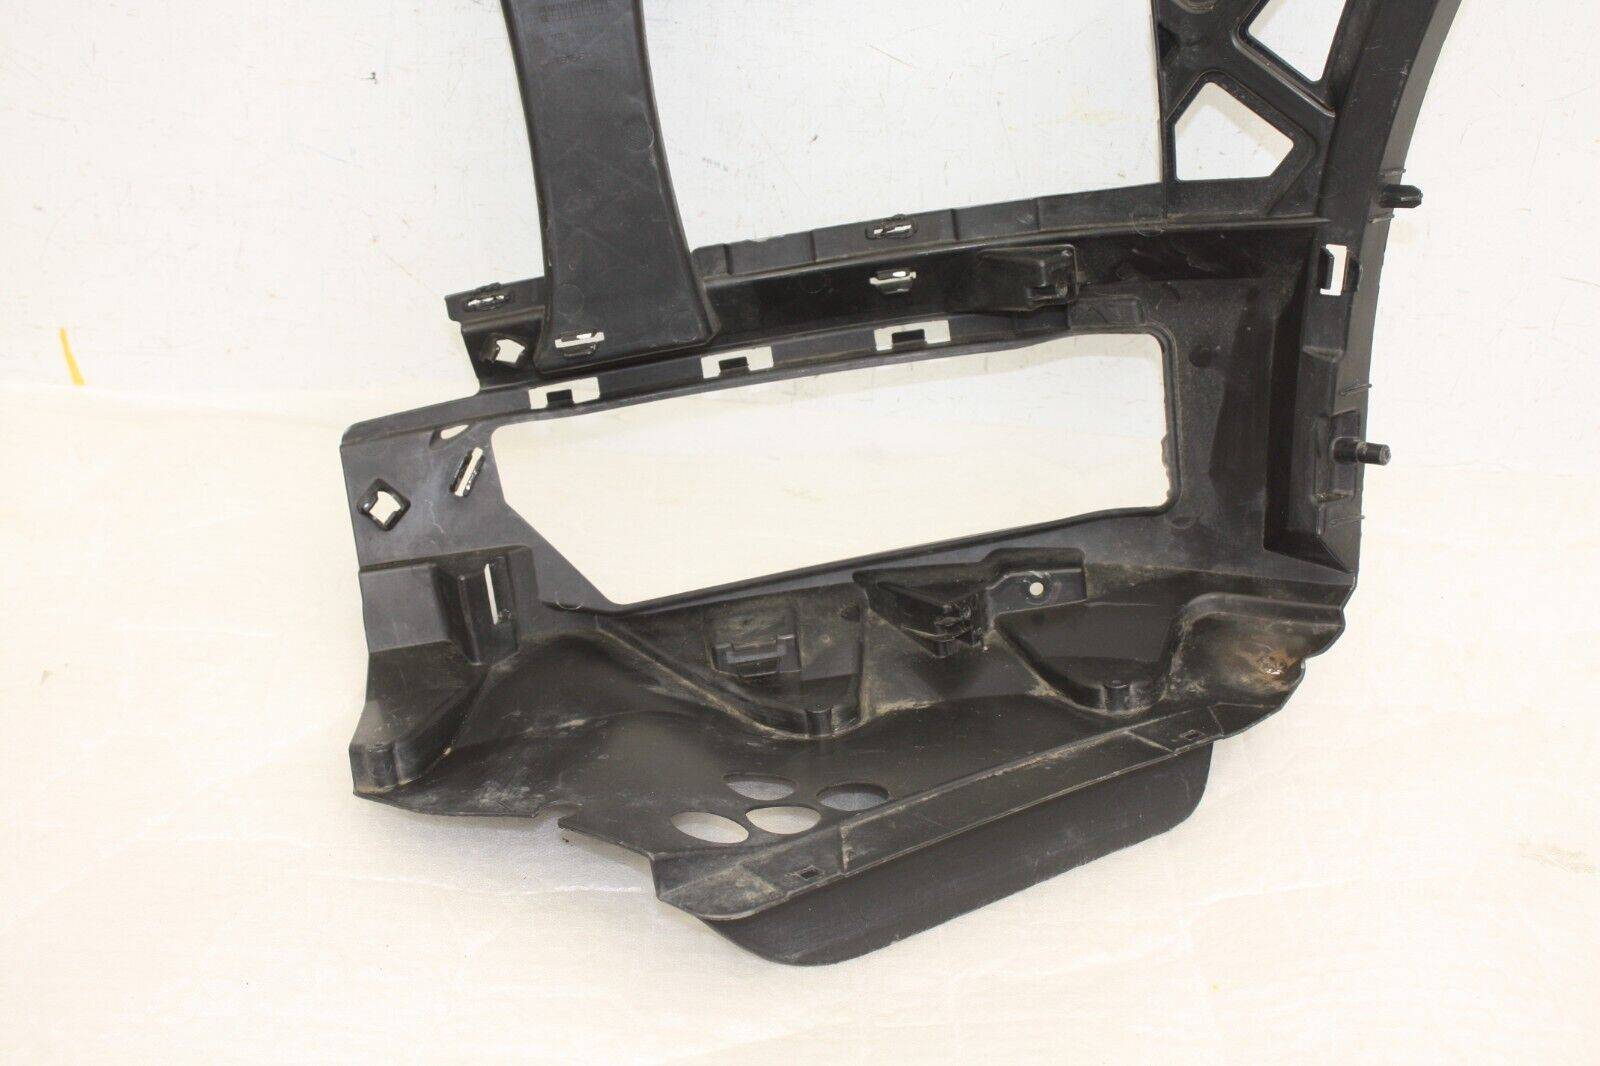 VW-Transporter-Front-Bumper-Right-Bracket-2015-TO-2020-7E0807178A-Genuine-176340045597-13